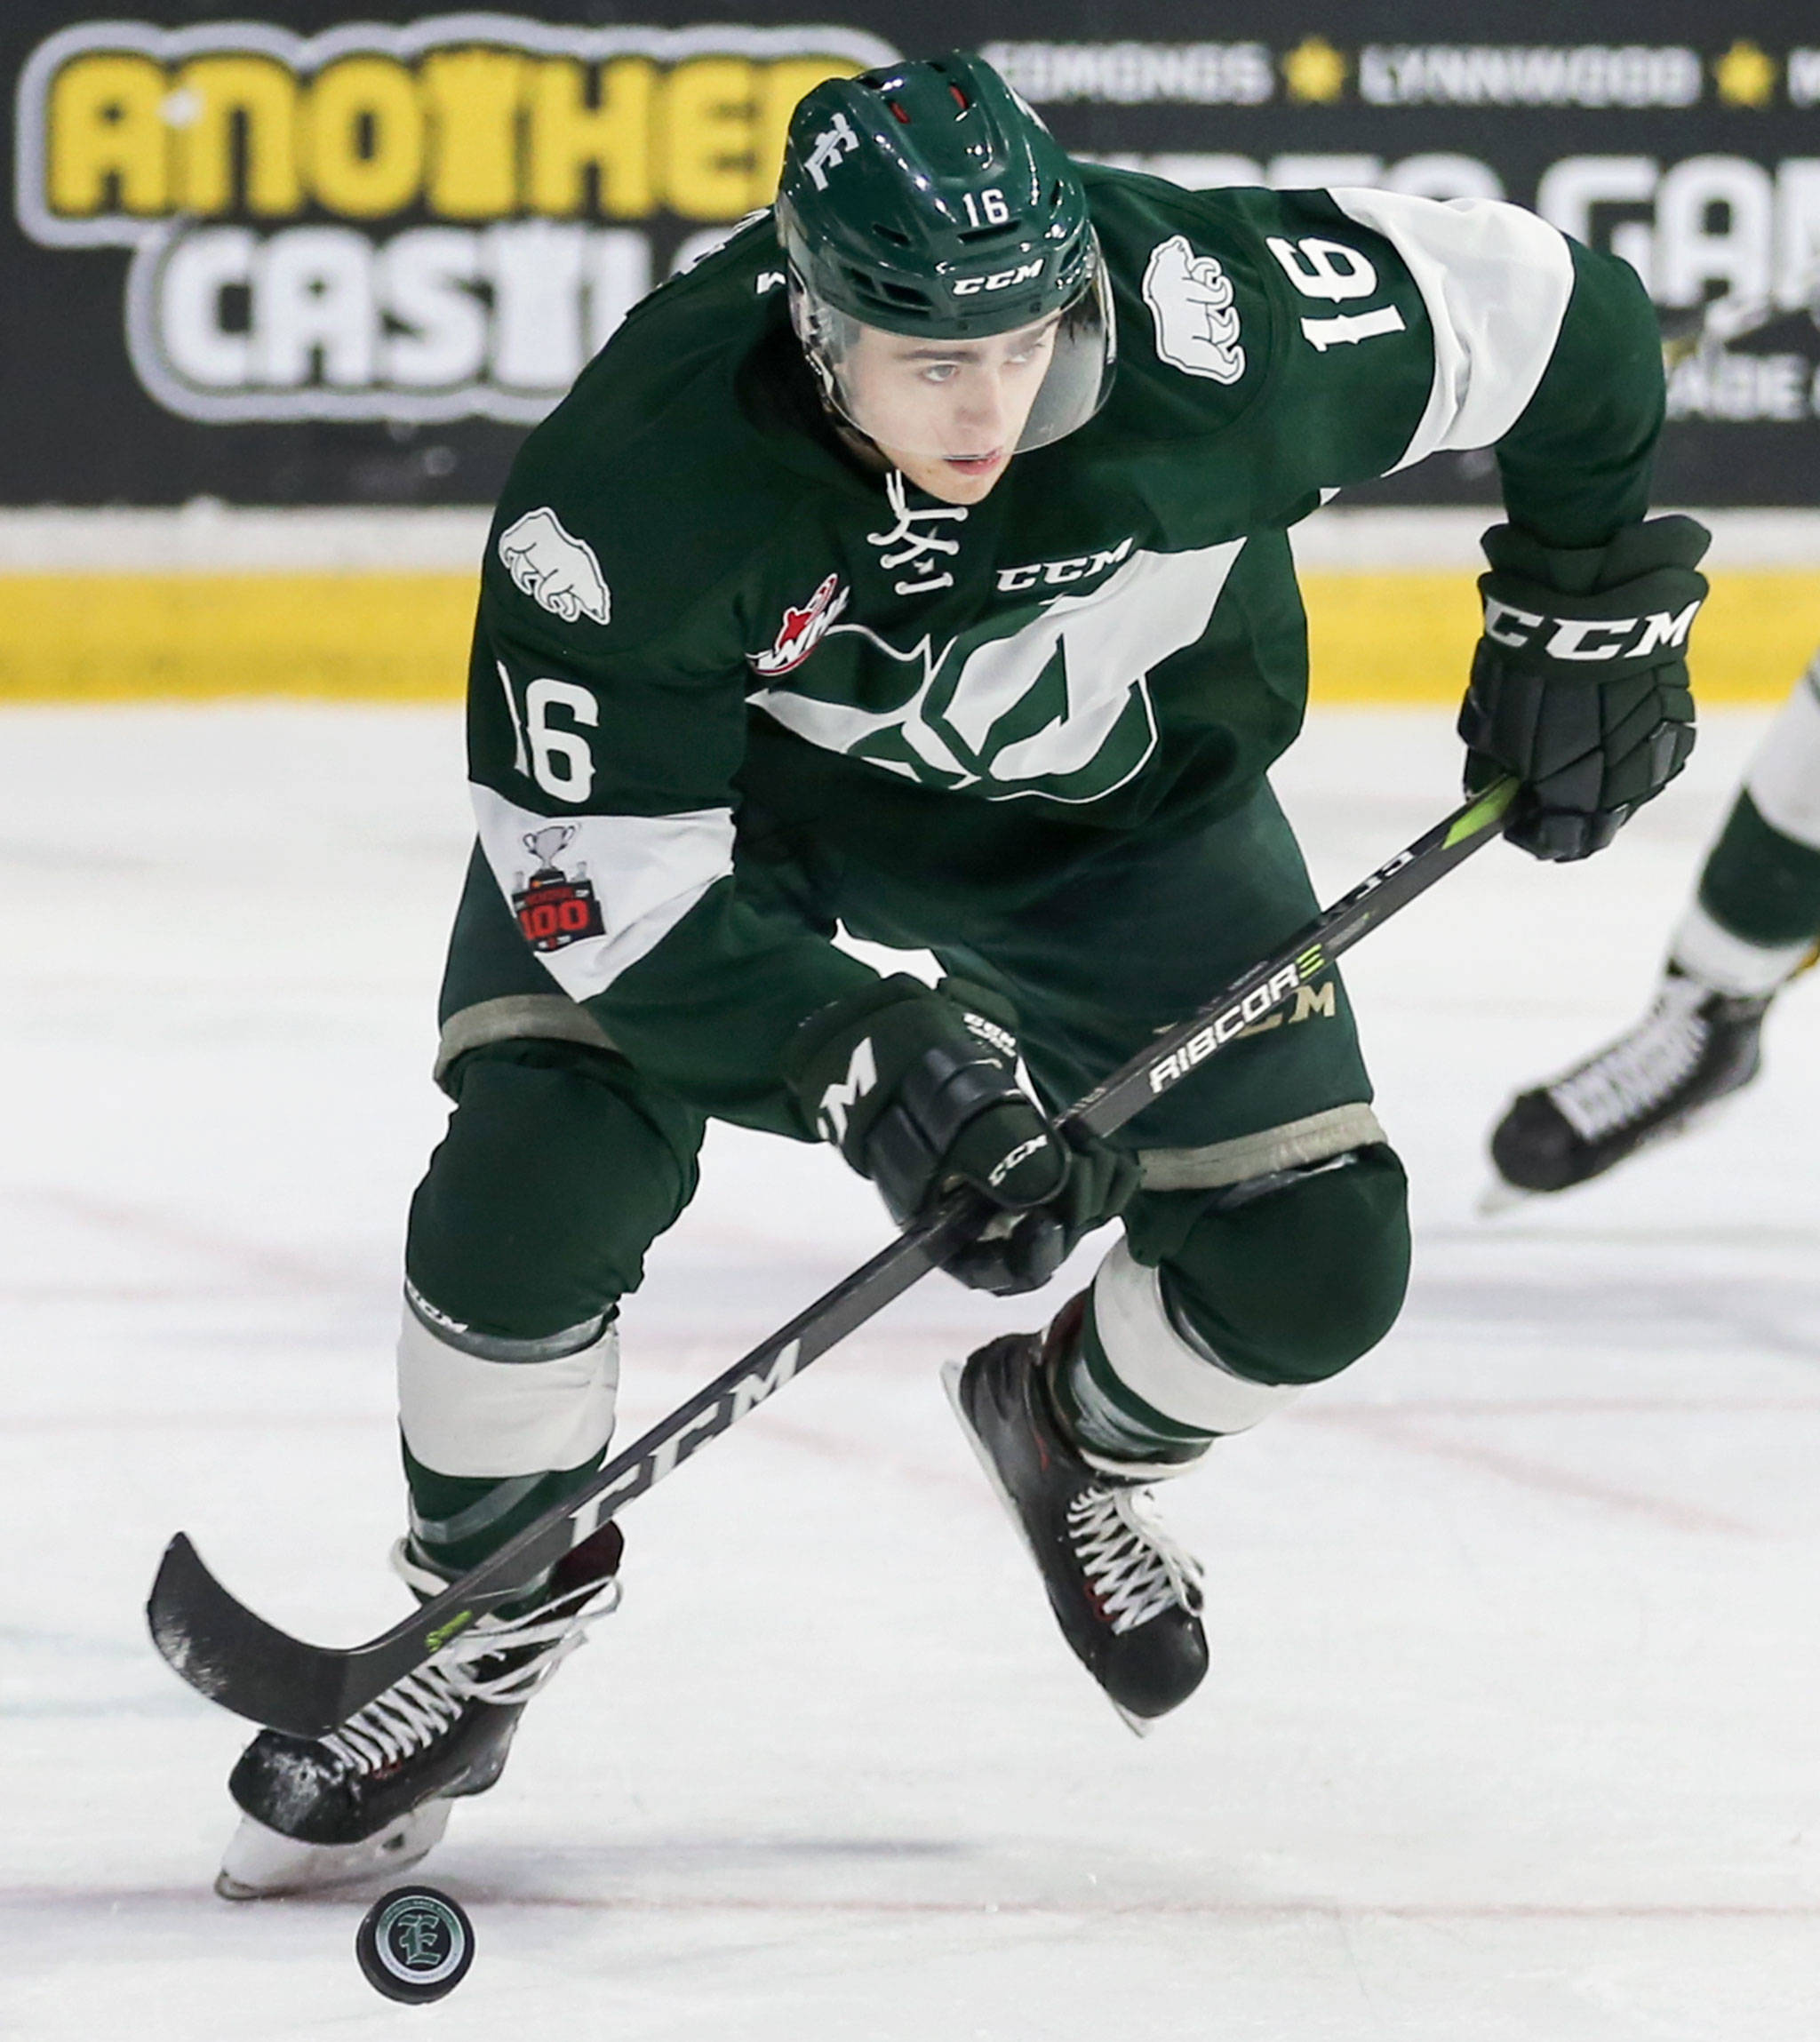 The Silvertips’ Luke Ormsby looks up the ice against Saskatoon on Dec. 2, 2017, at Xfinity Arena in Everett. (Kevin Clark / The Herald)